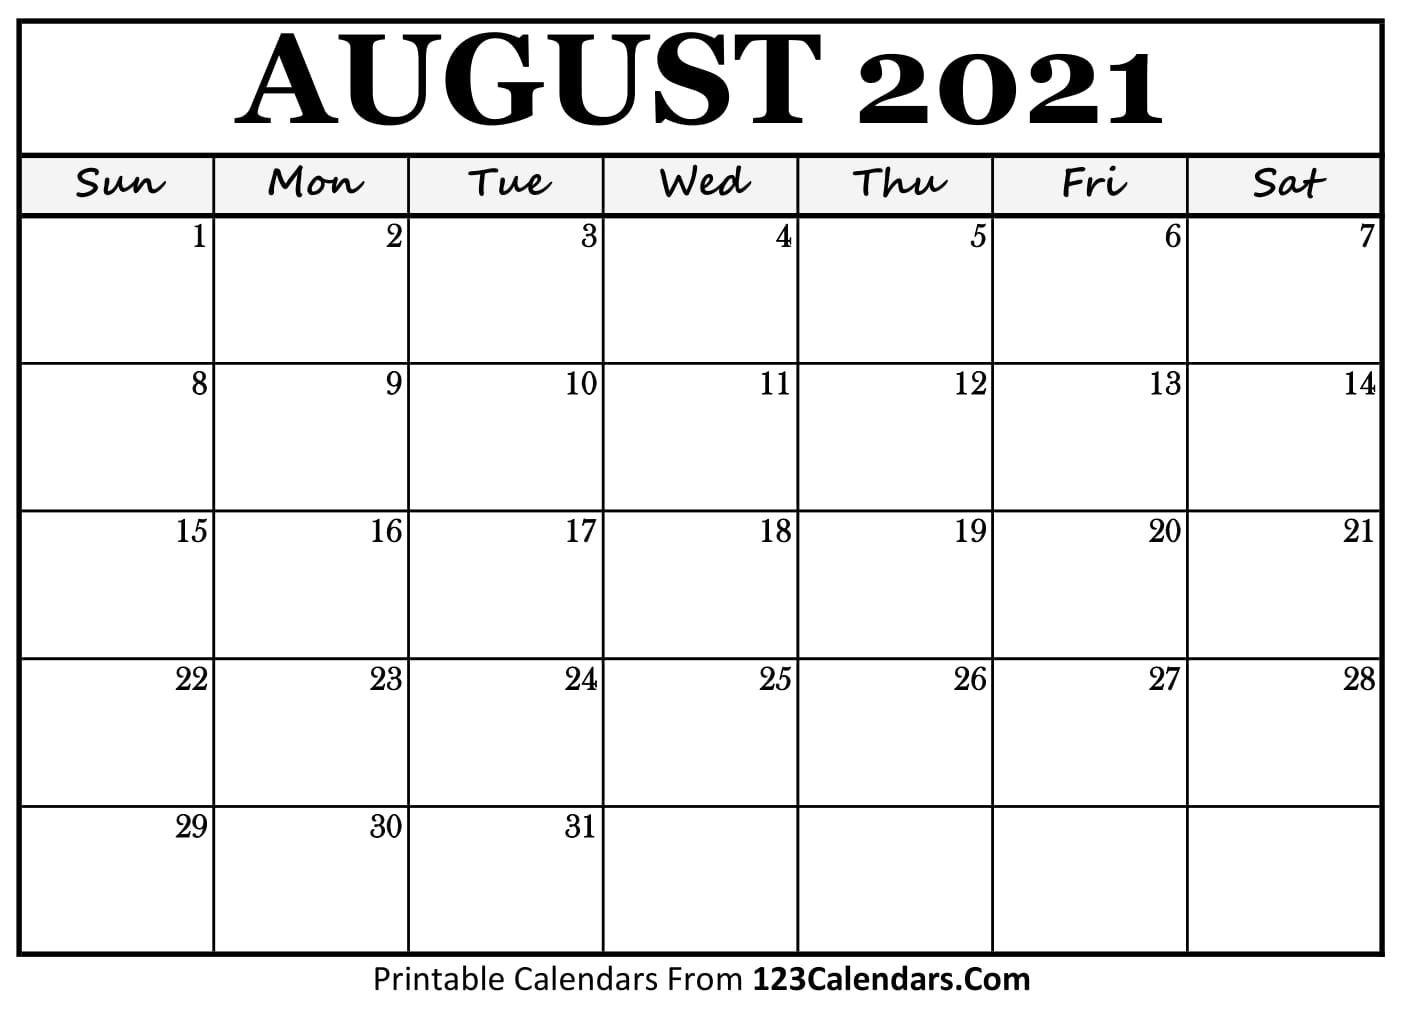 Download Printable Calendar August 2021 To August 2022 Pics